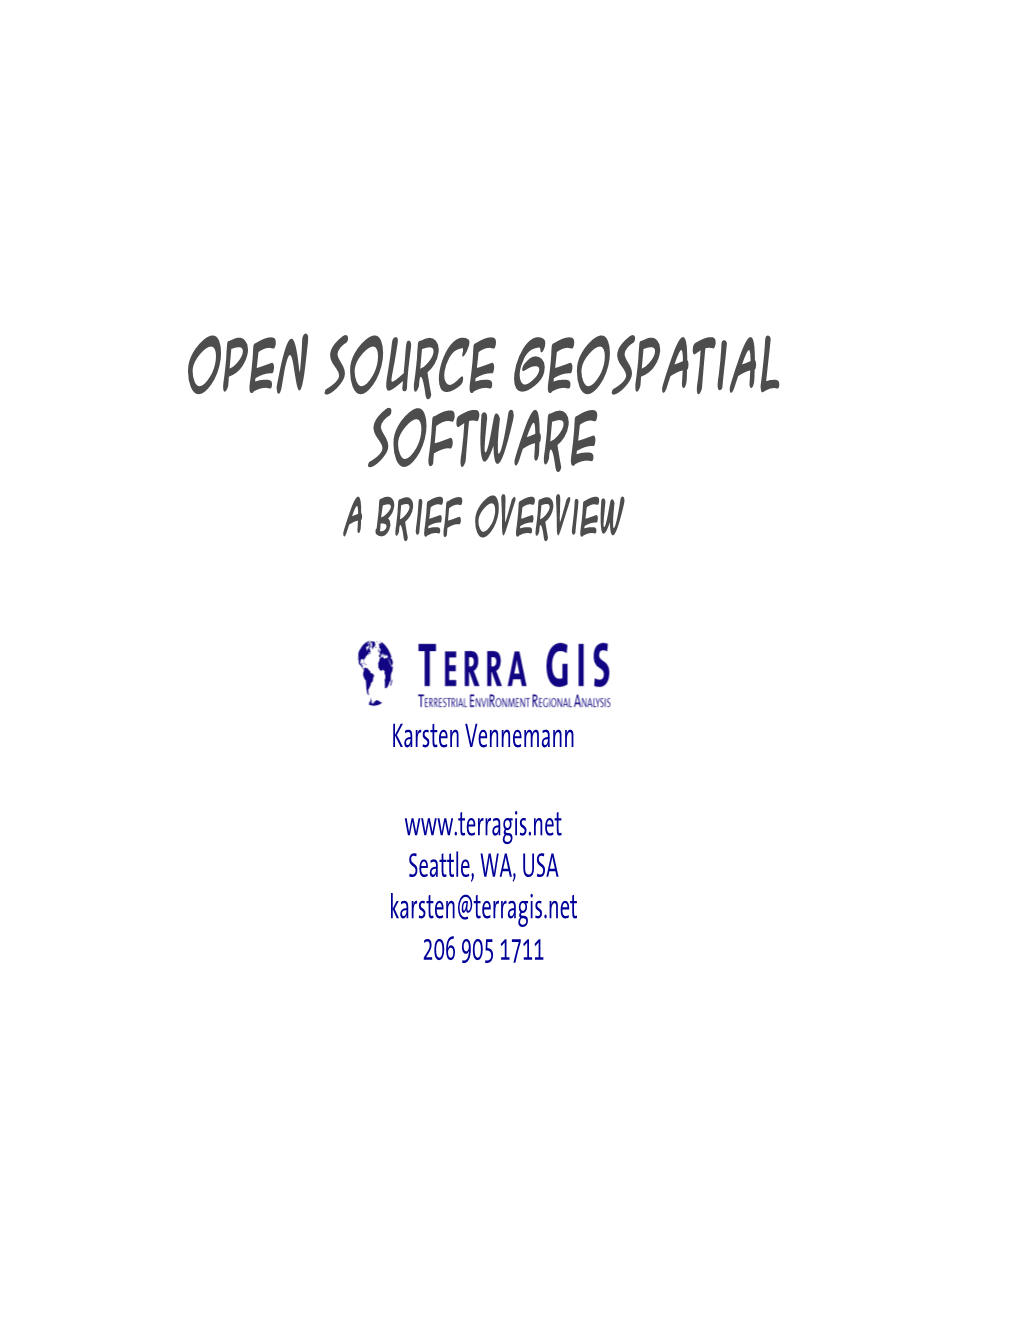 Open Source Geospatial Software a Brief Overview